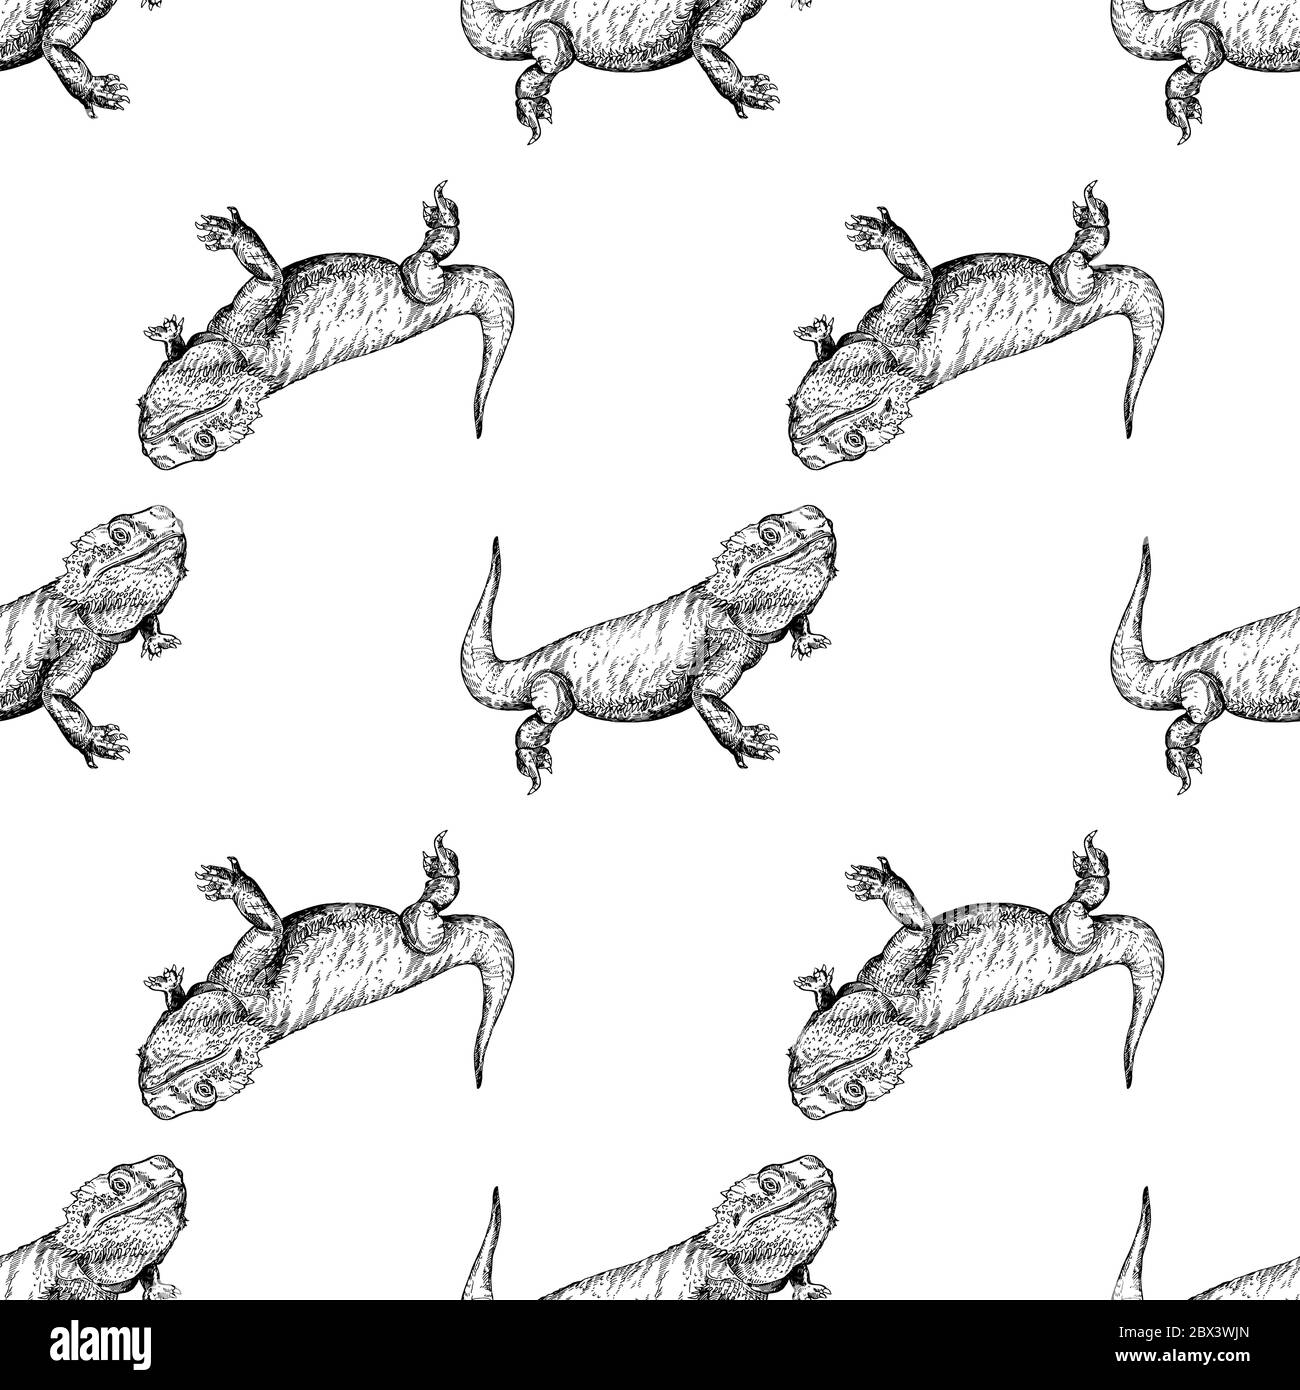 Seamless pattern of hand drawn sketch style bearded dragons isolated on white background. Vector illustration. Stock Vector